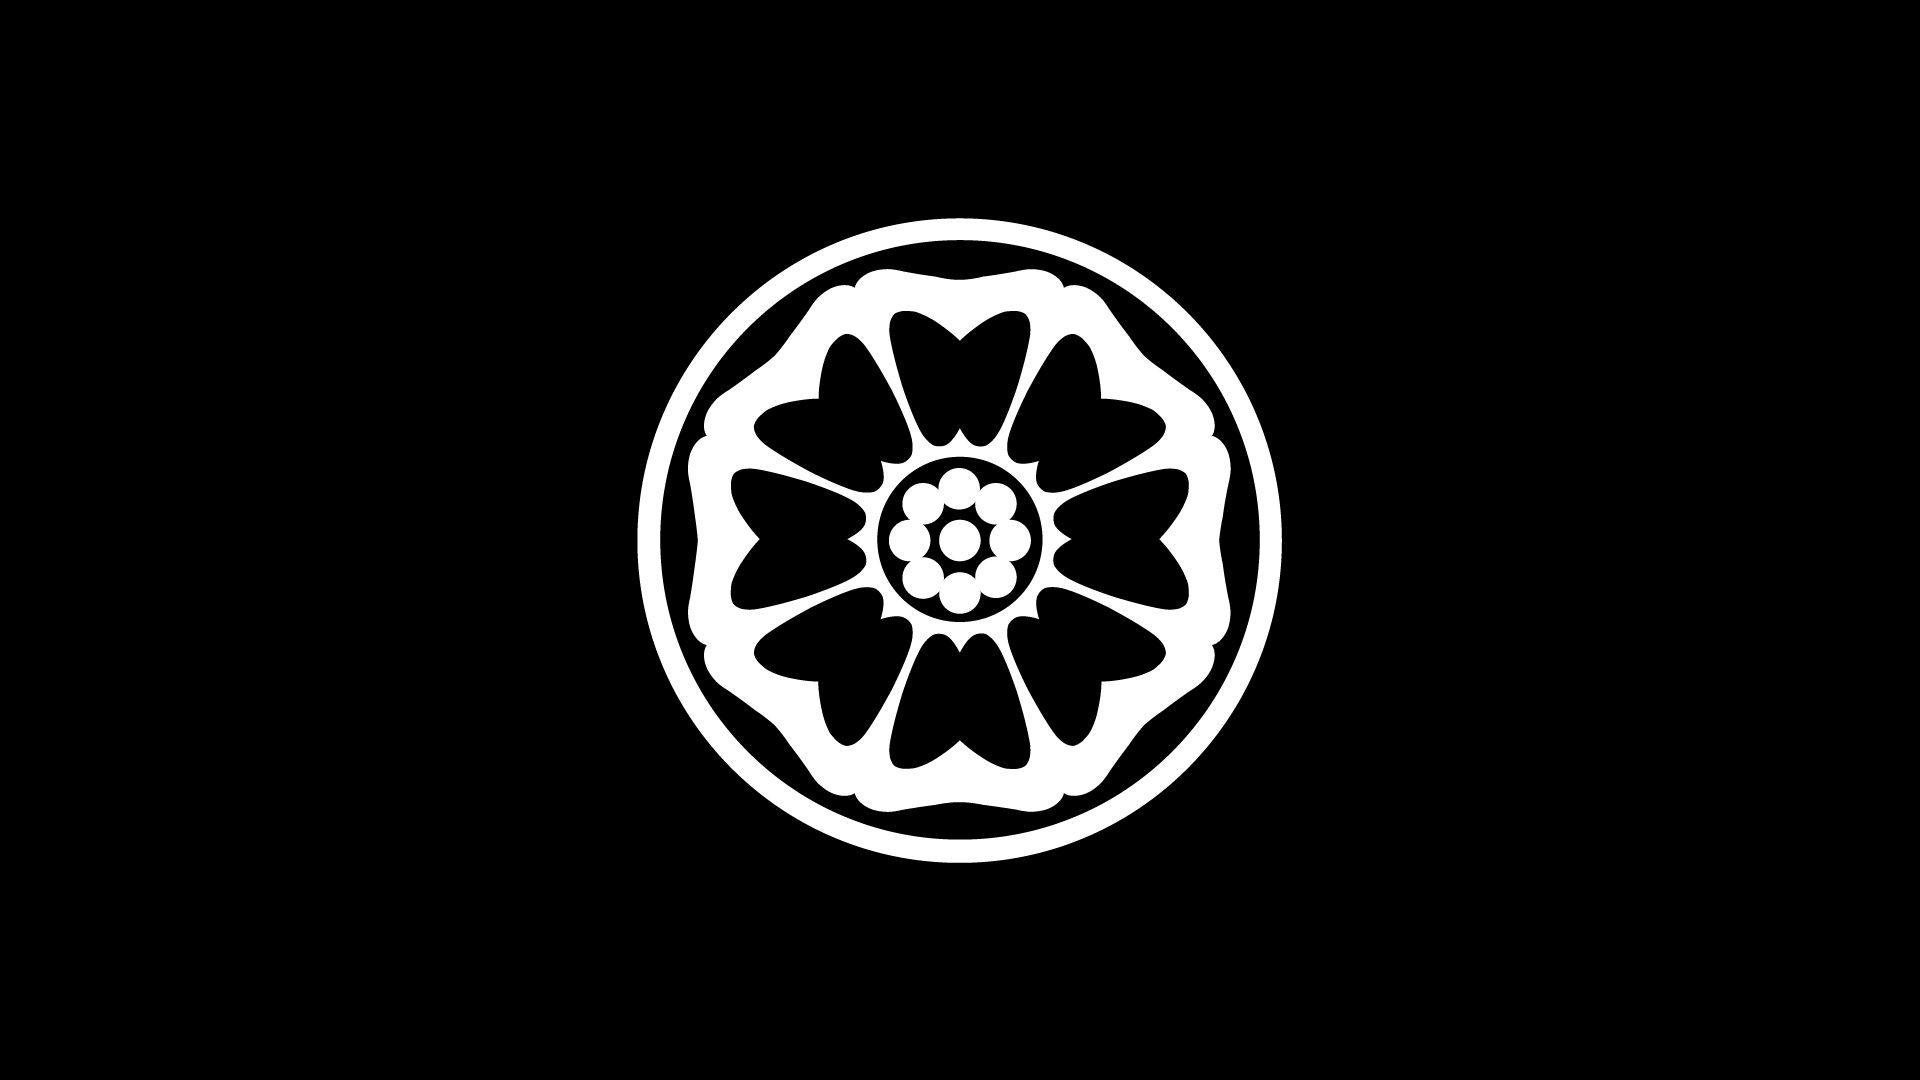 Black and White Lotus Logo - Fan conent][No Spoilers]I wanted a new desktop background so made ...